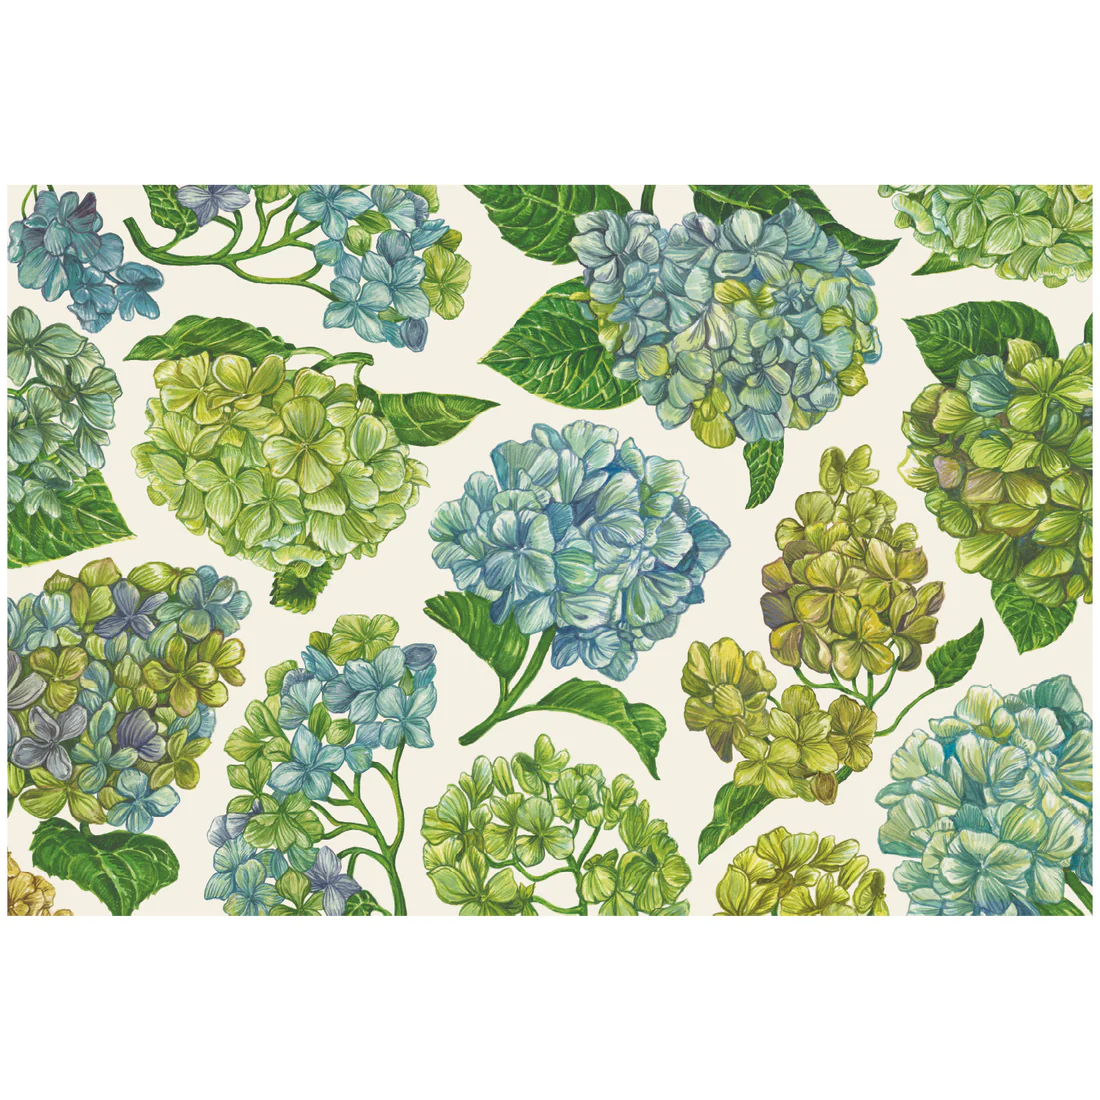 Blue and green floral pattern on Blooming Hydrangeas Placemat, adding elegance to your table settings.